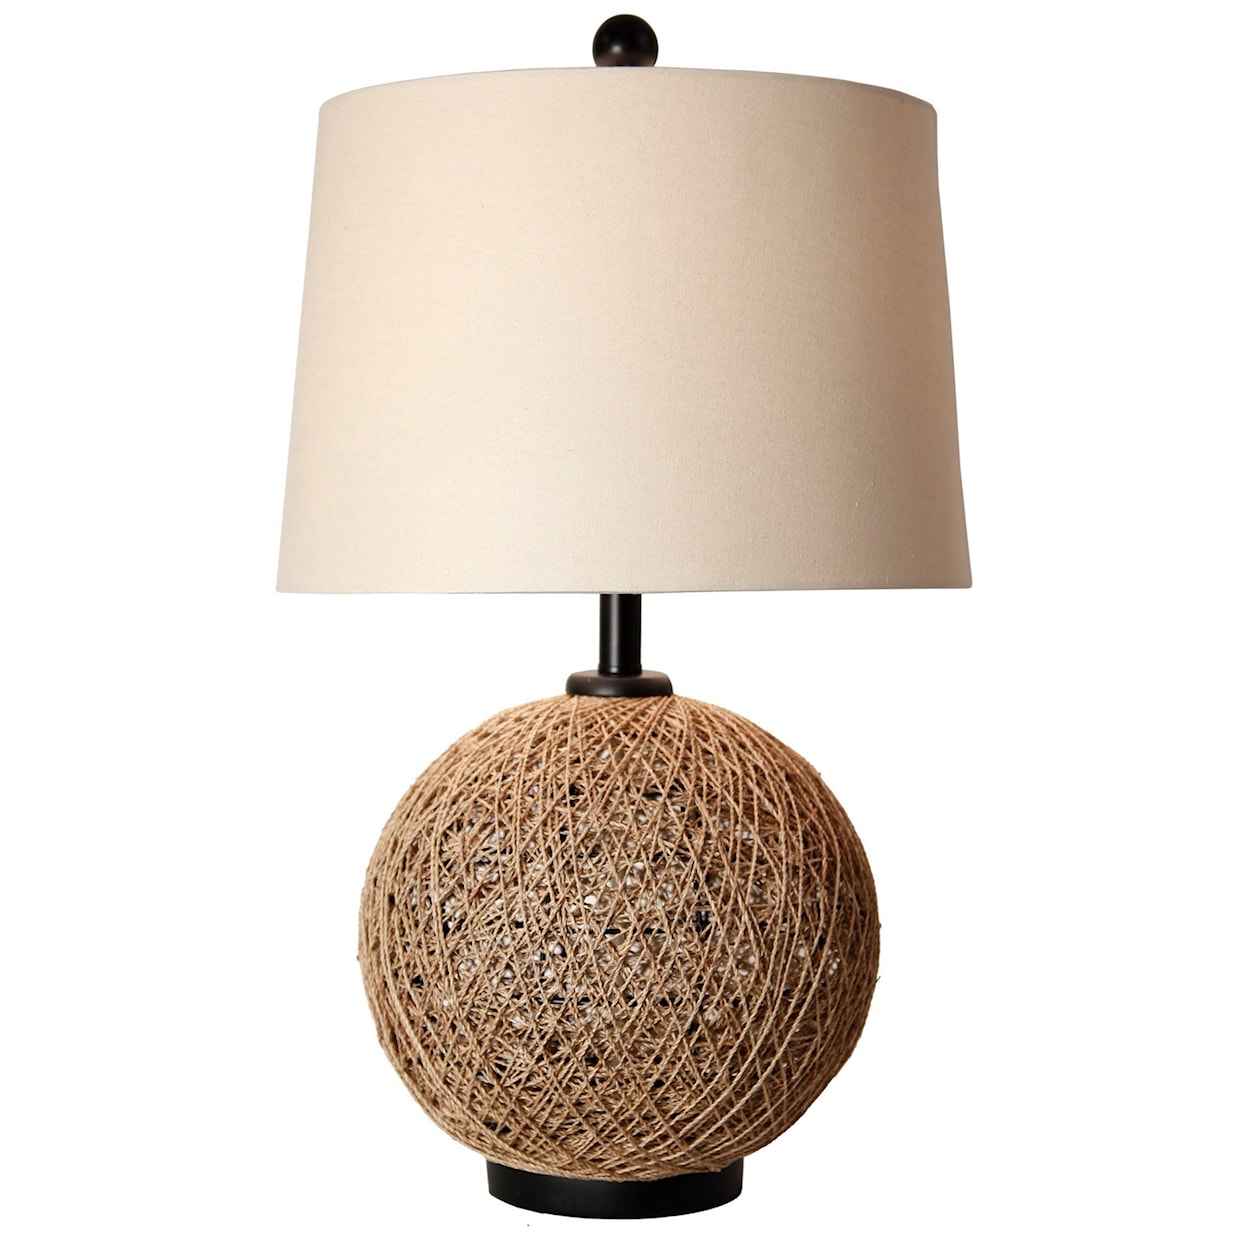 StyleCraft Lamps Woven Natural Rattan Ball Table Lamp